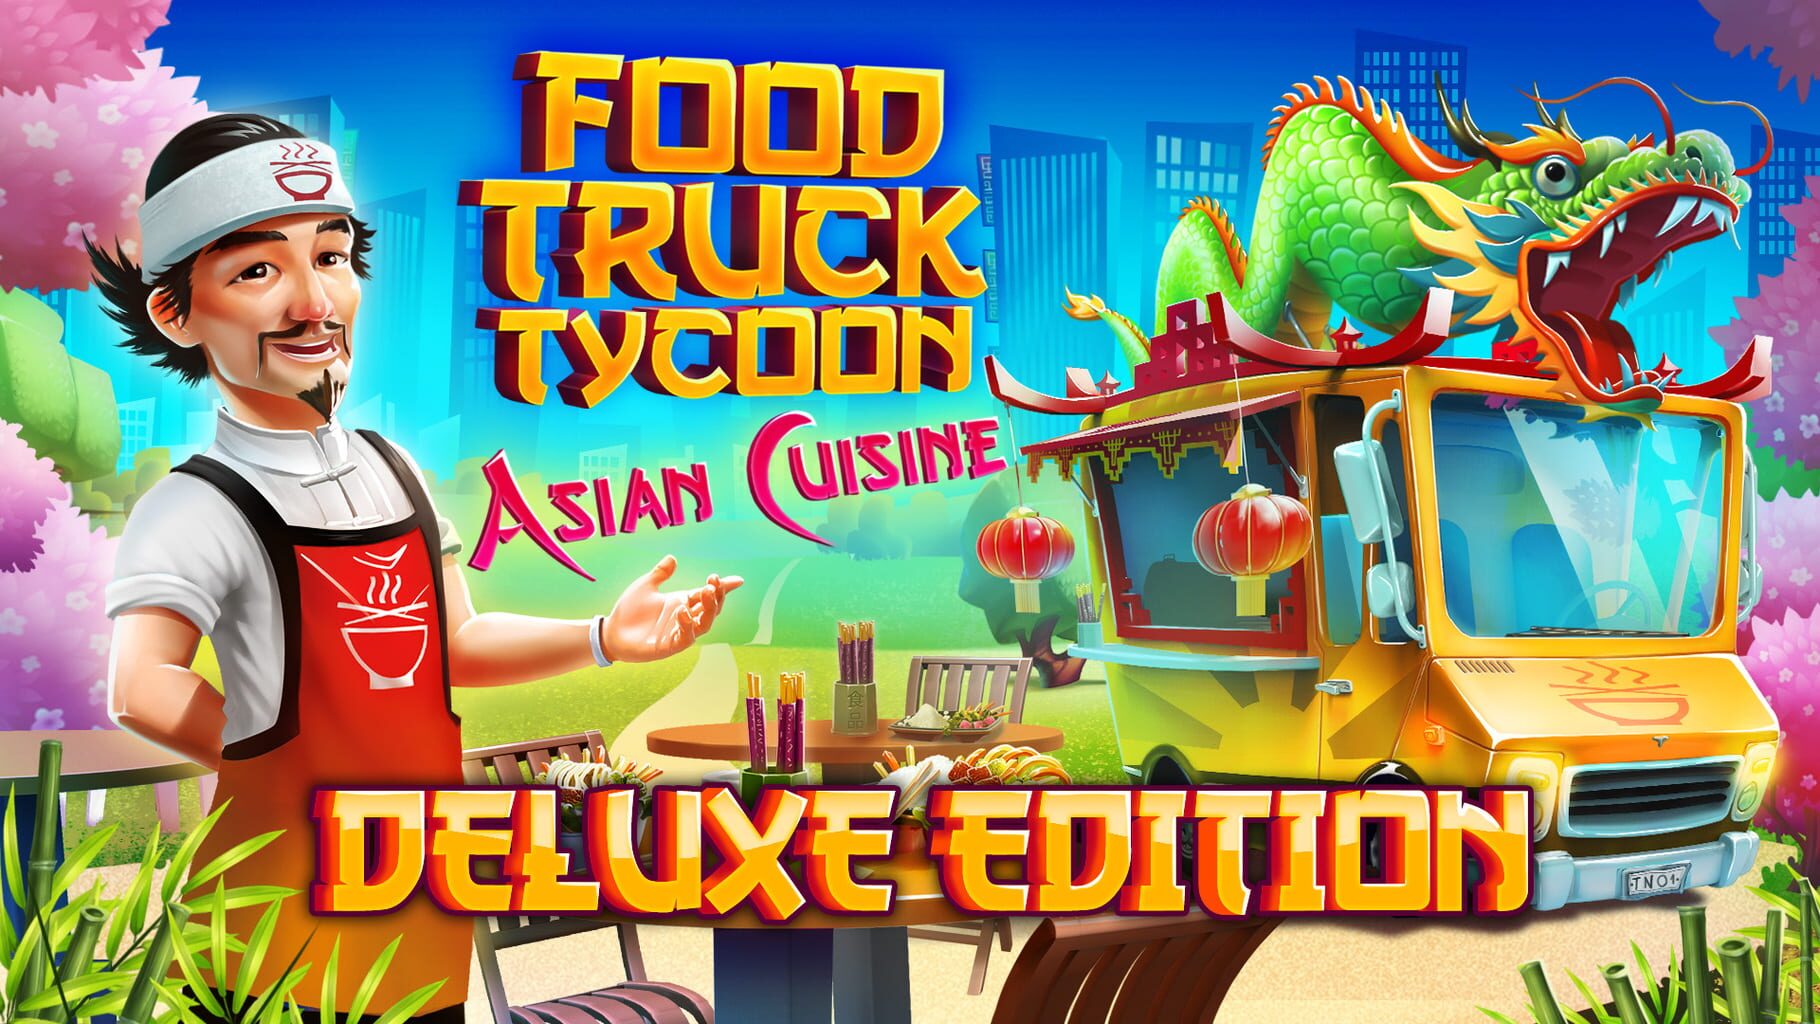 Food Truck Tycoon: Asian Cuisine - Deluxe Edition artwork